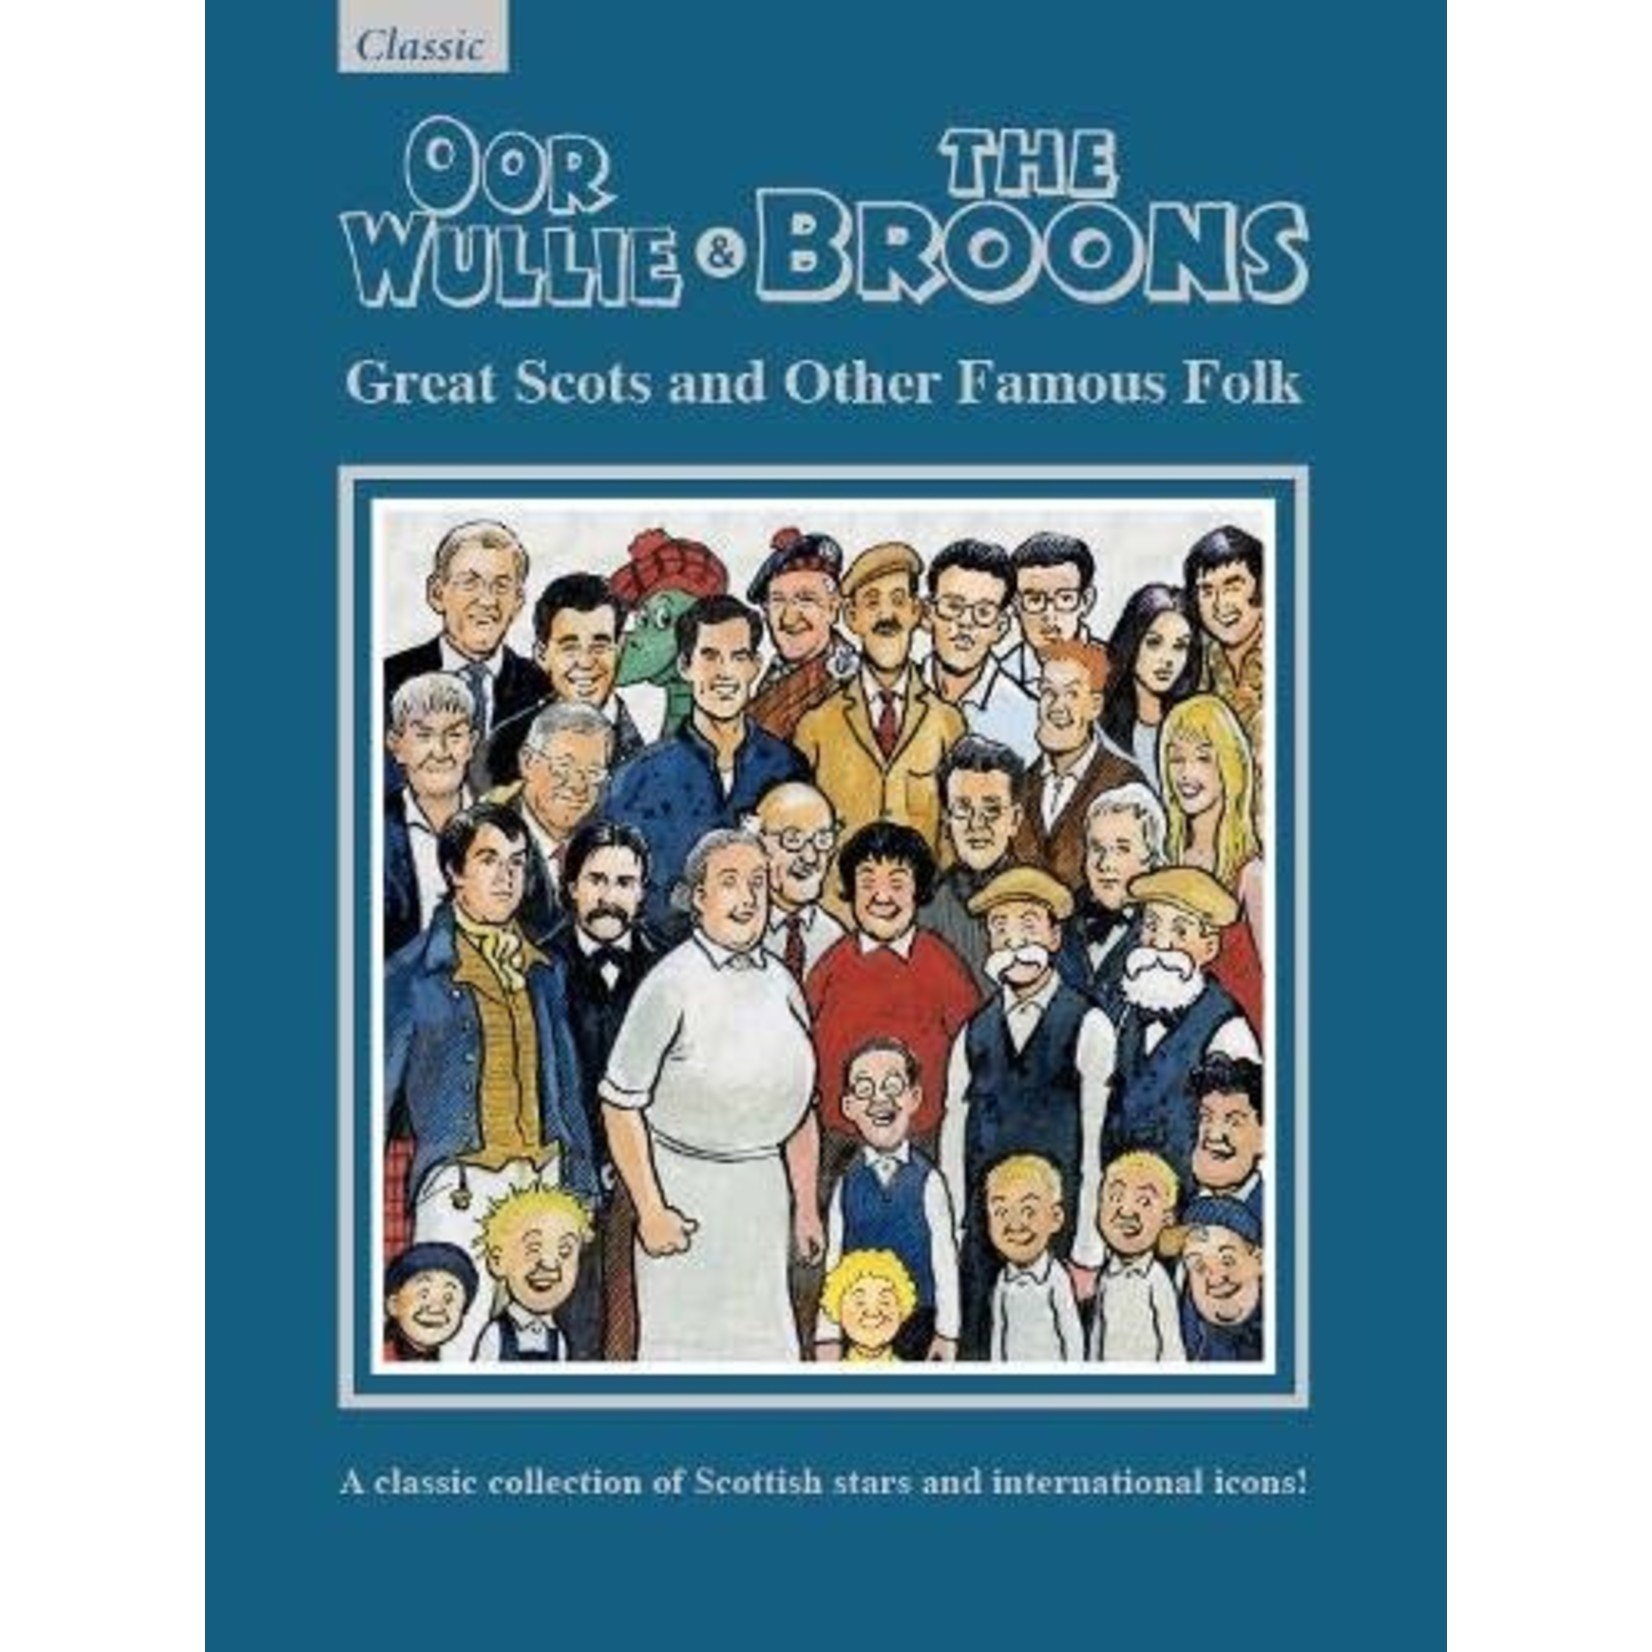 Oor Wullie & The Broons - Great Scots and Other Famous Folk